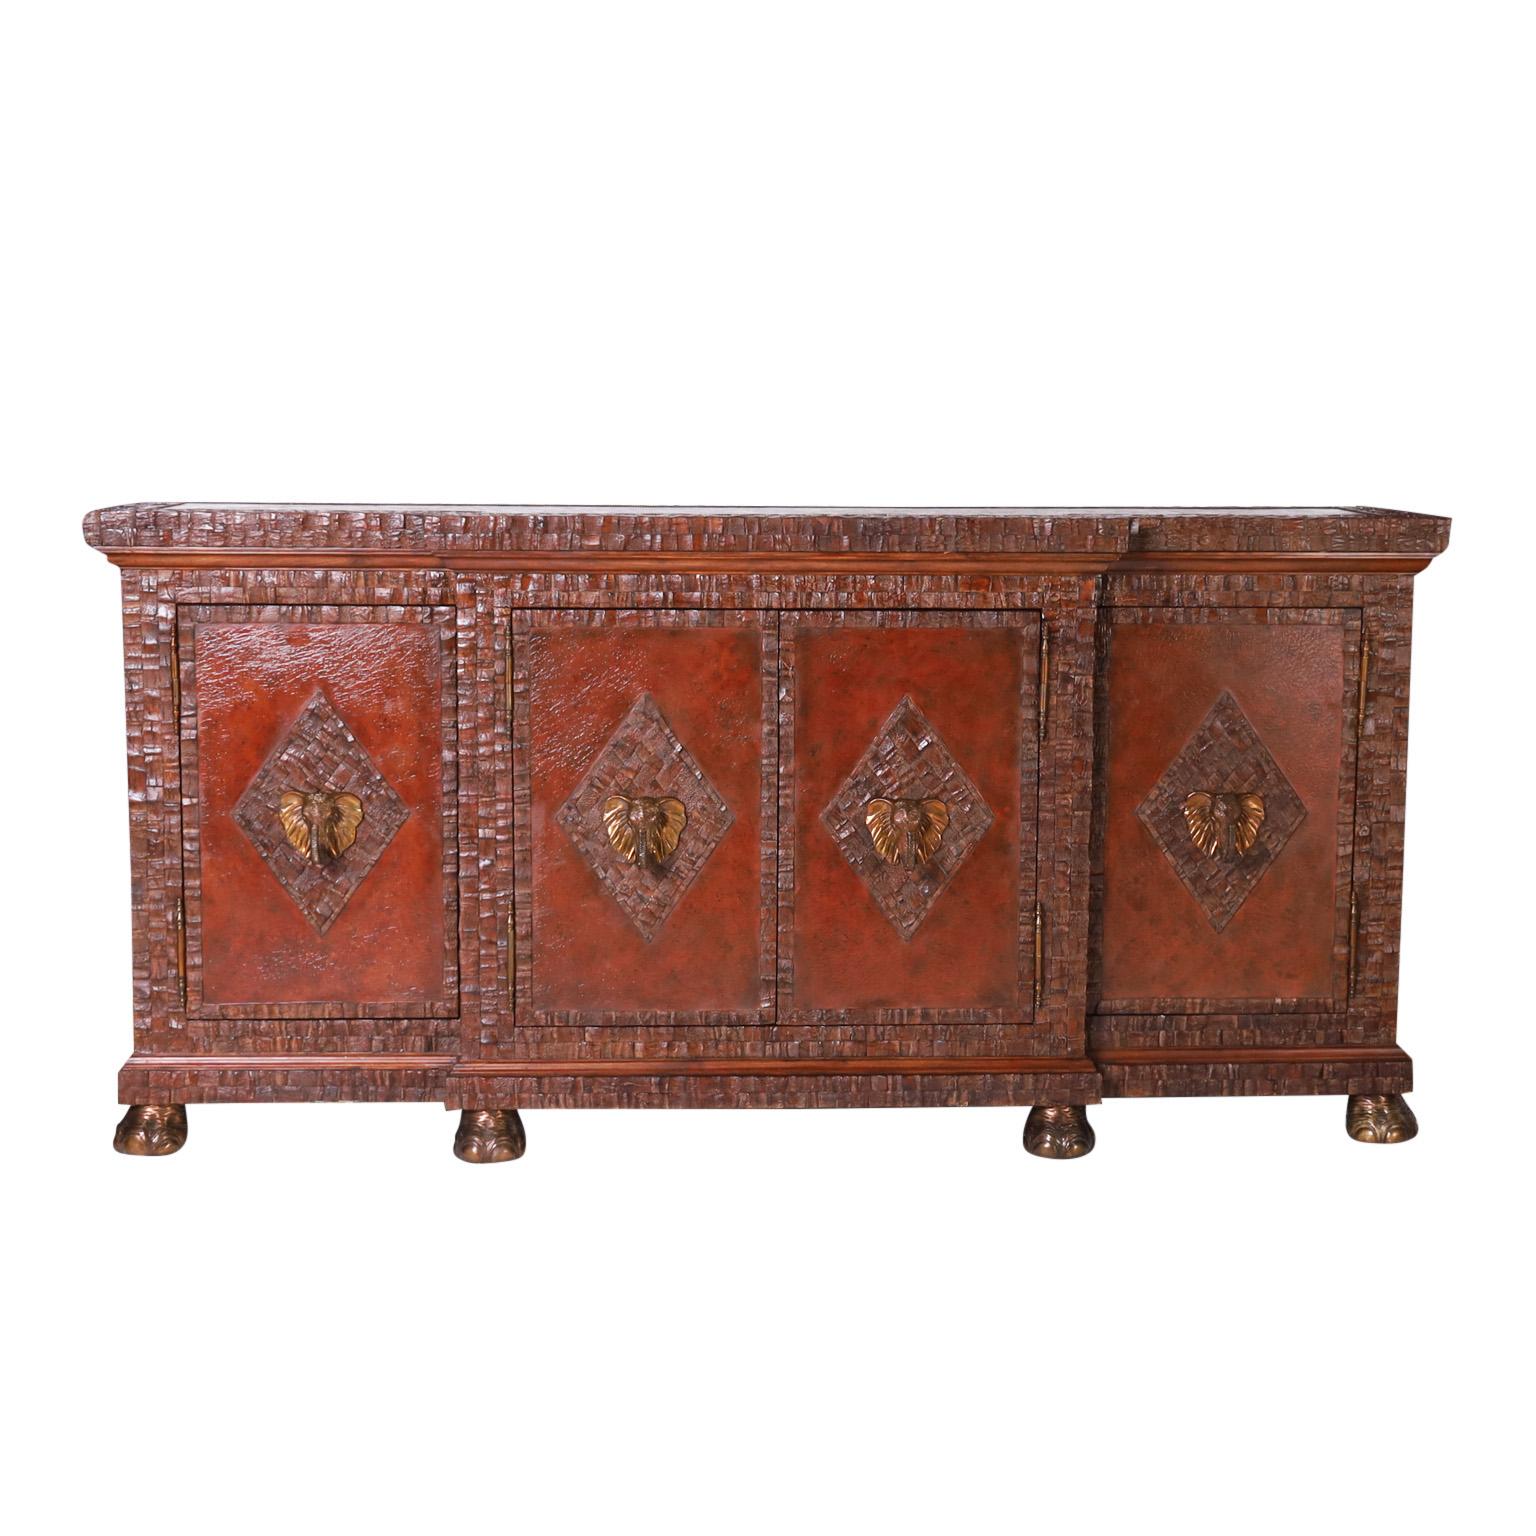 Impressive midcentury Maitland-Smith sideboard or wine cabinet with a textured bronze top in a coconut border on a four door case having bronze elephant head handles in coconut panels on leather backgrounds with coconut shell frames. The mahogany